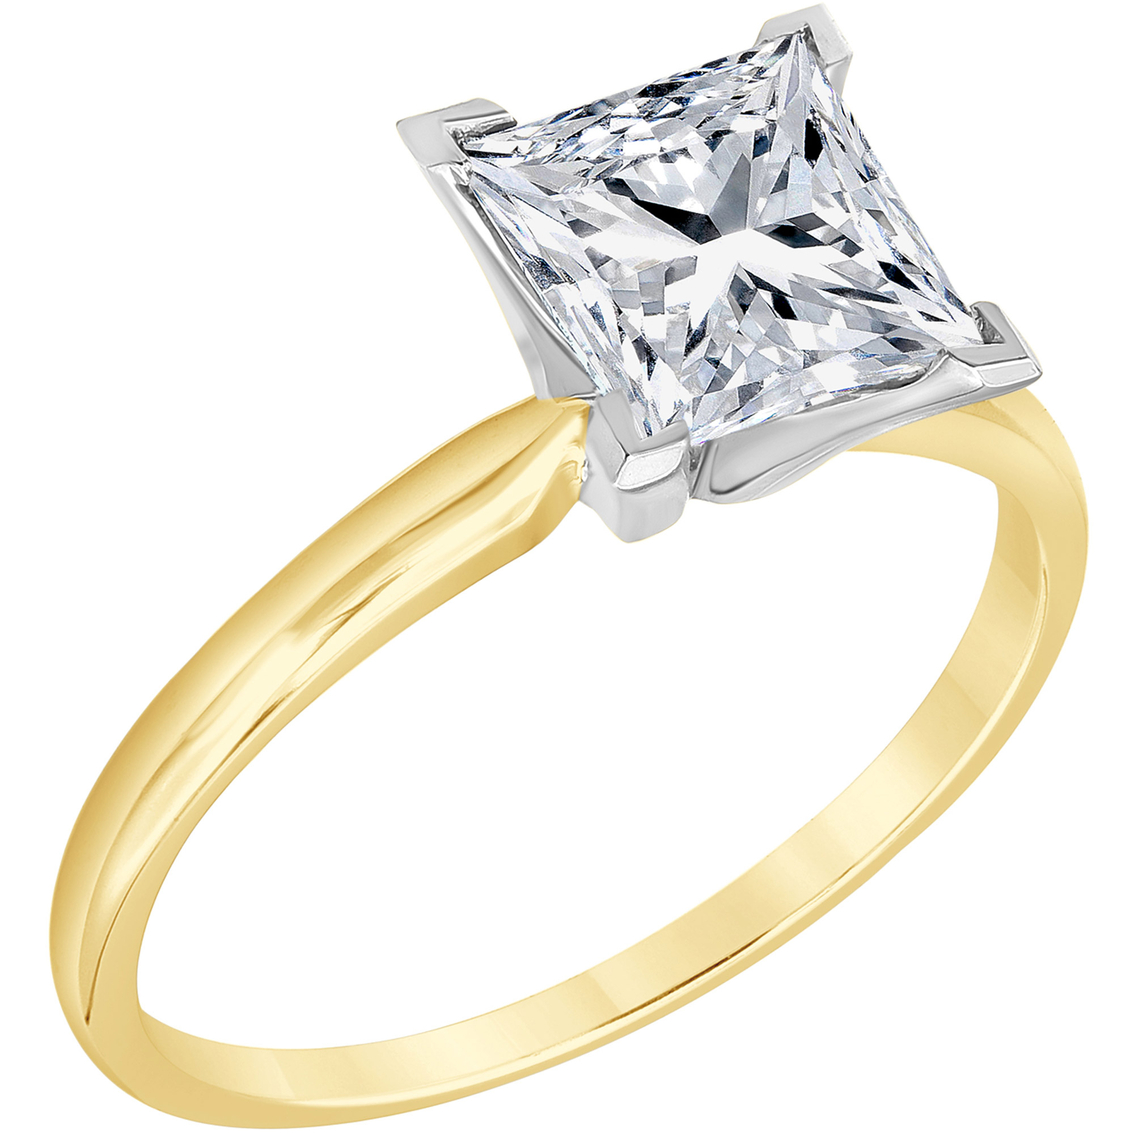 14k1 1/2 Ct Princess Cut Diamond Solitaire Ring | Solitaires Over 1 Ct ...